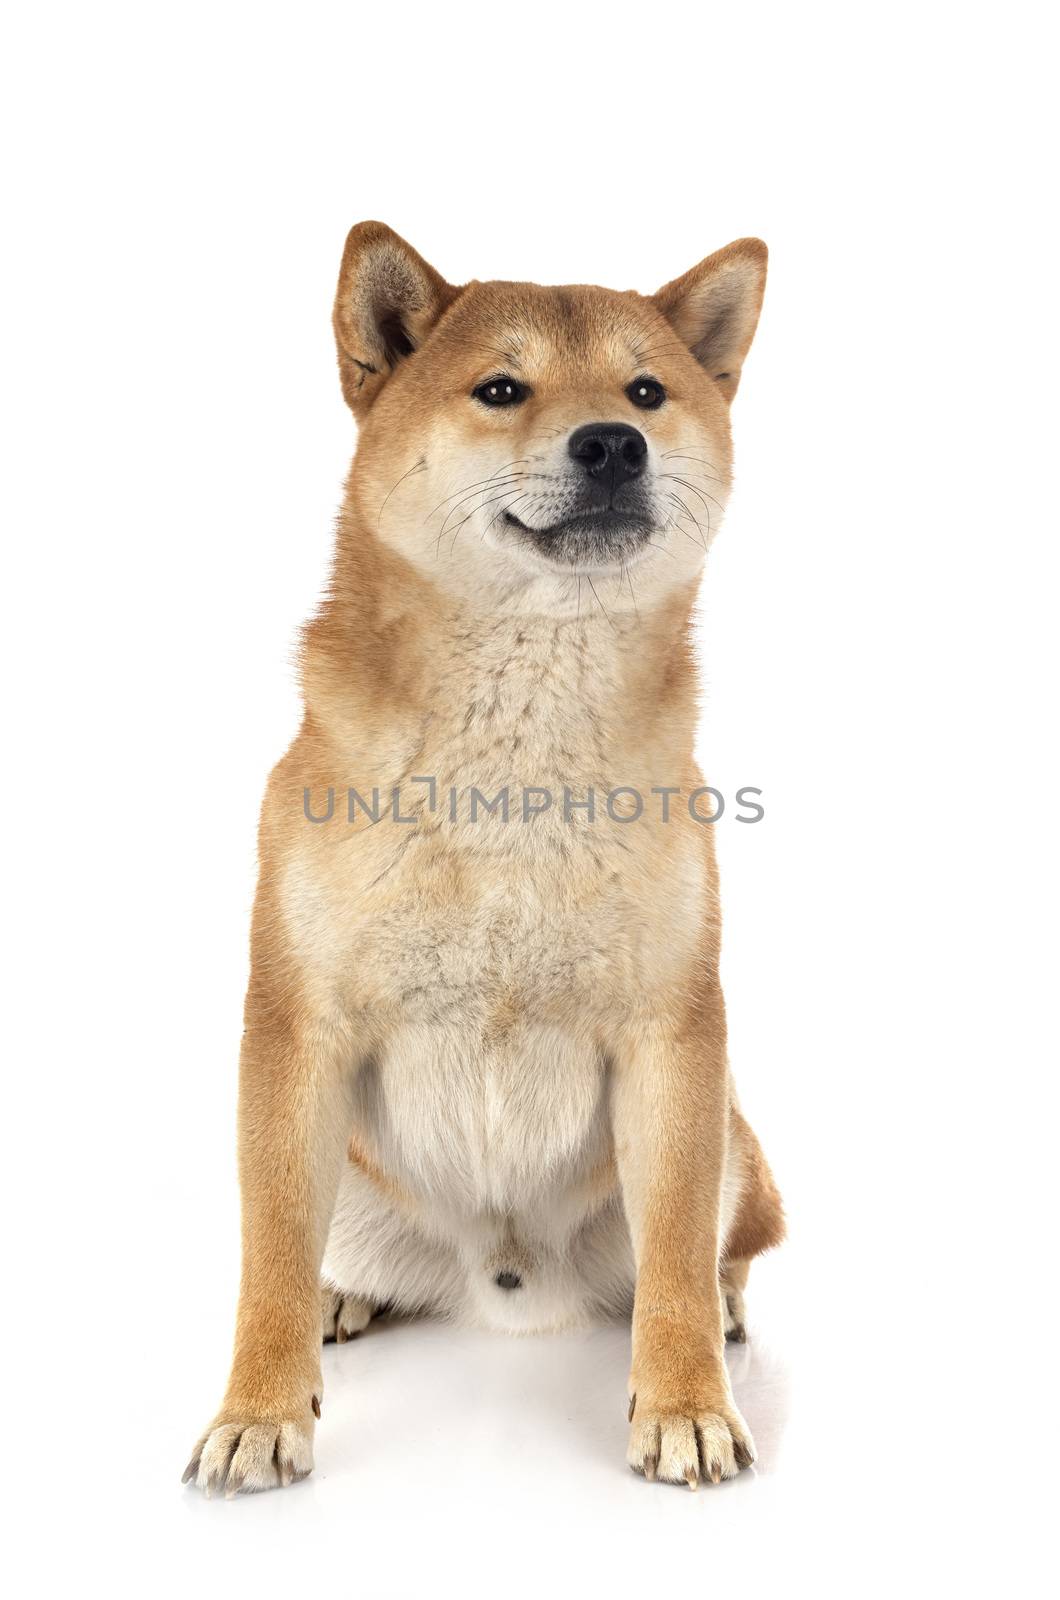 shiba inu in front of white background